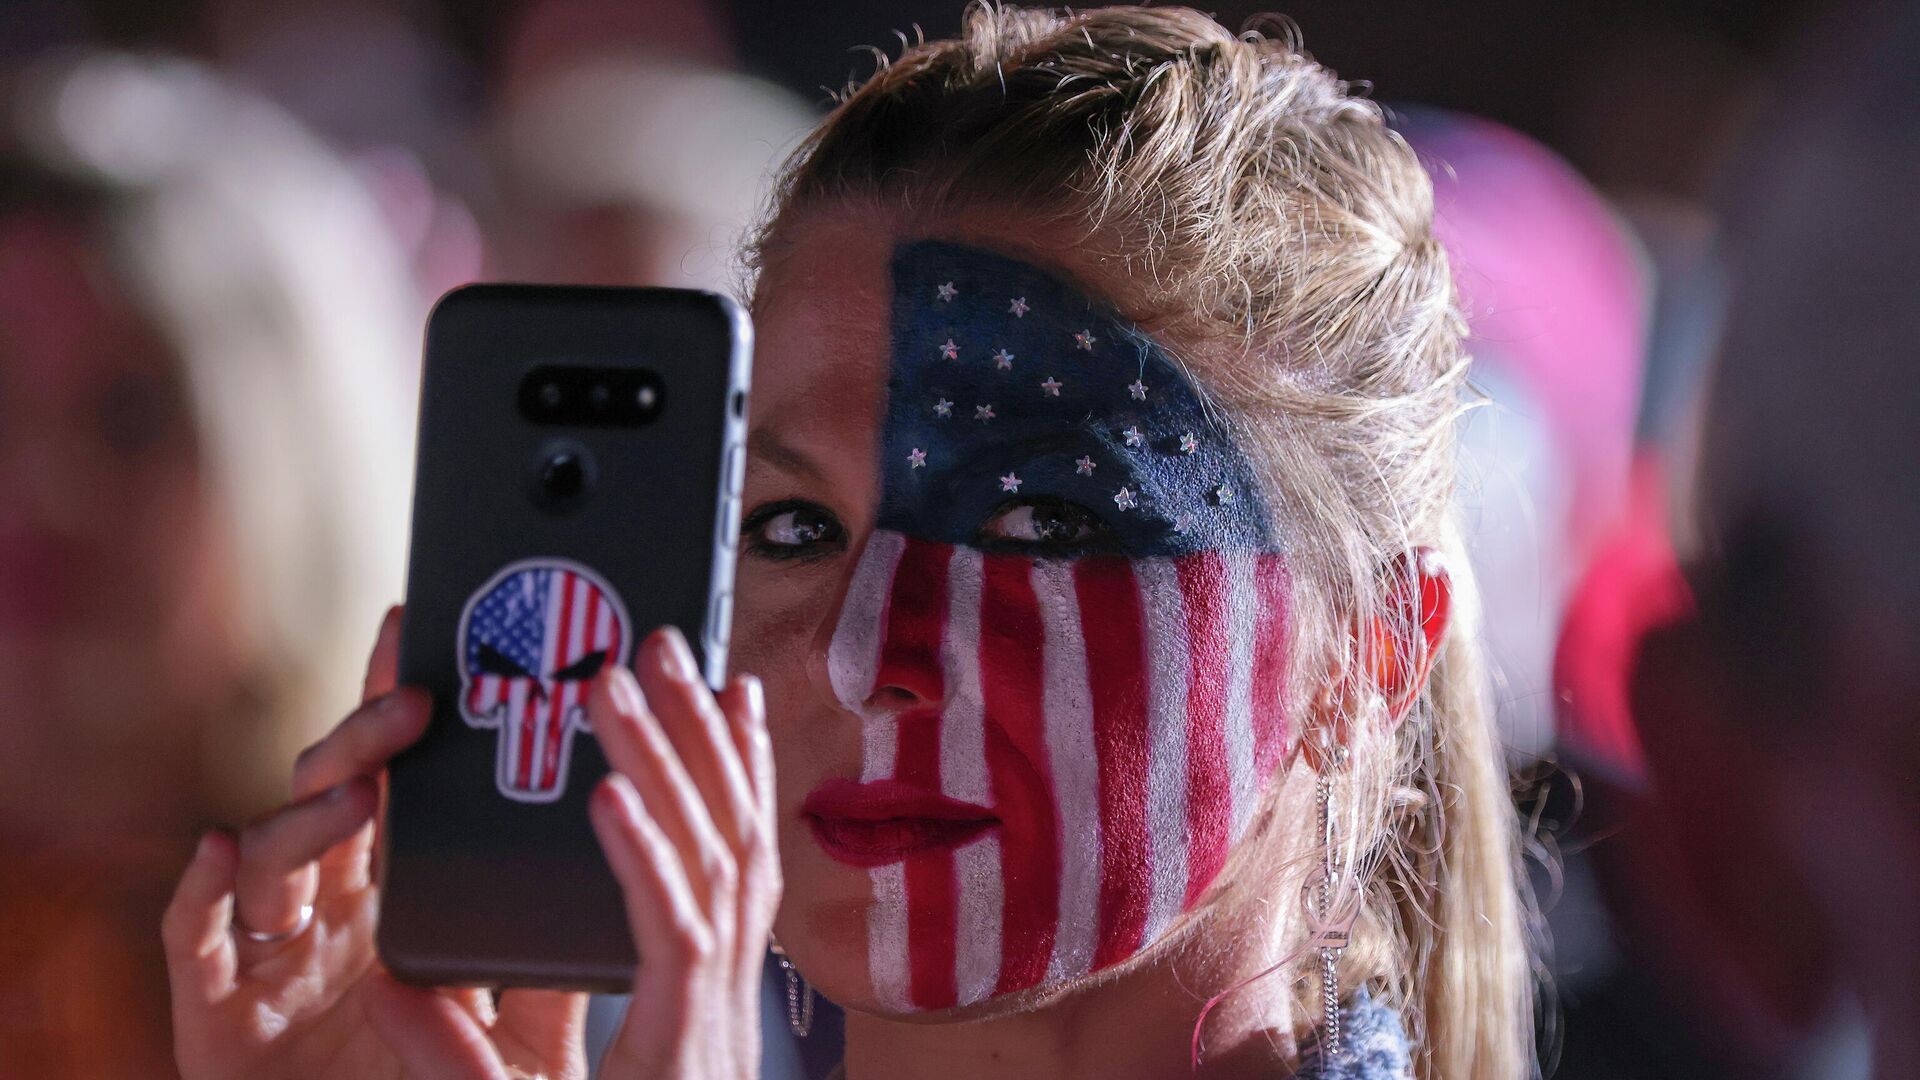 A supporter is seen with half her face painted in the colors of the U.S. flag during a rally attended by former U.S. President Donald Trump in Perry, Georgia, U.S. September 25, 2021 - Sputnik International, 1920, 02.10.2021